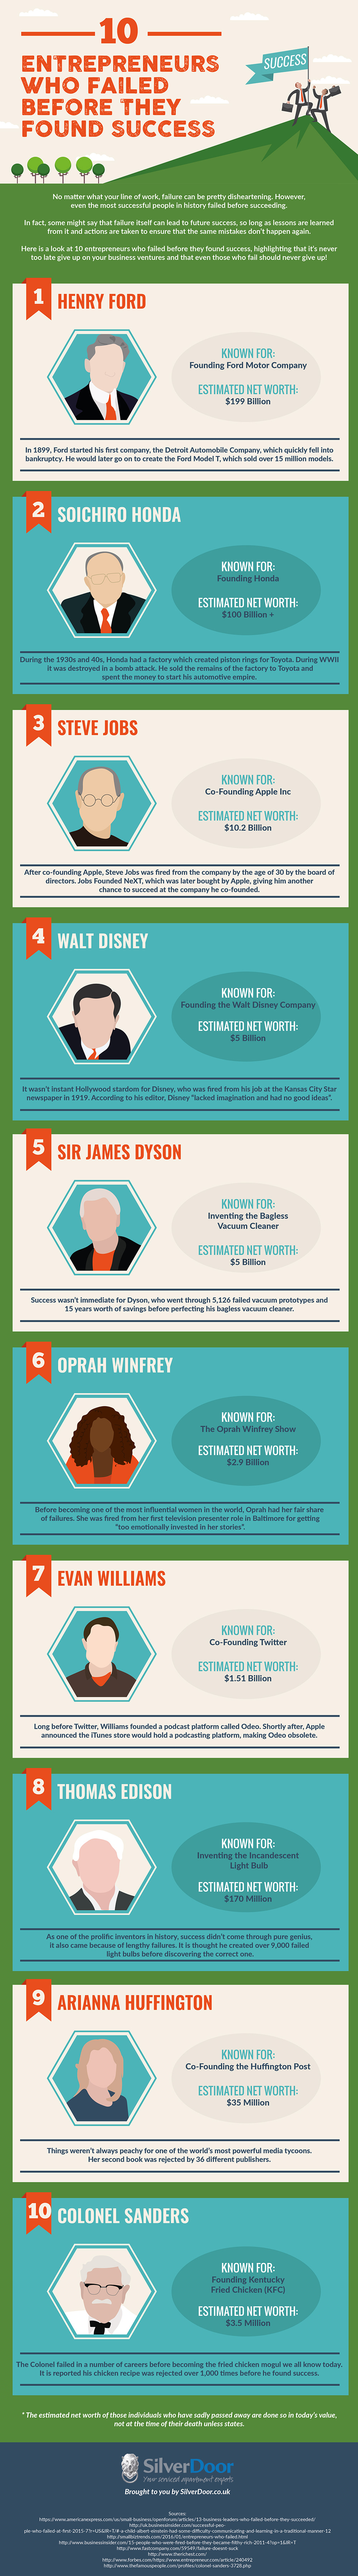 10 Entrepreneurs Who Failed Before They Found Success [Infographic]